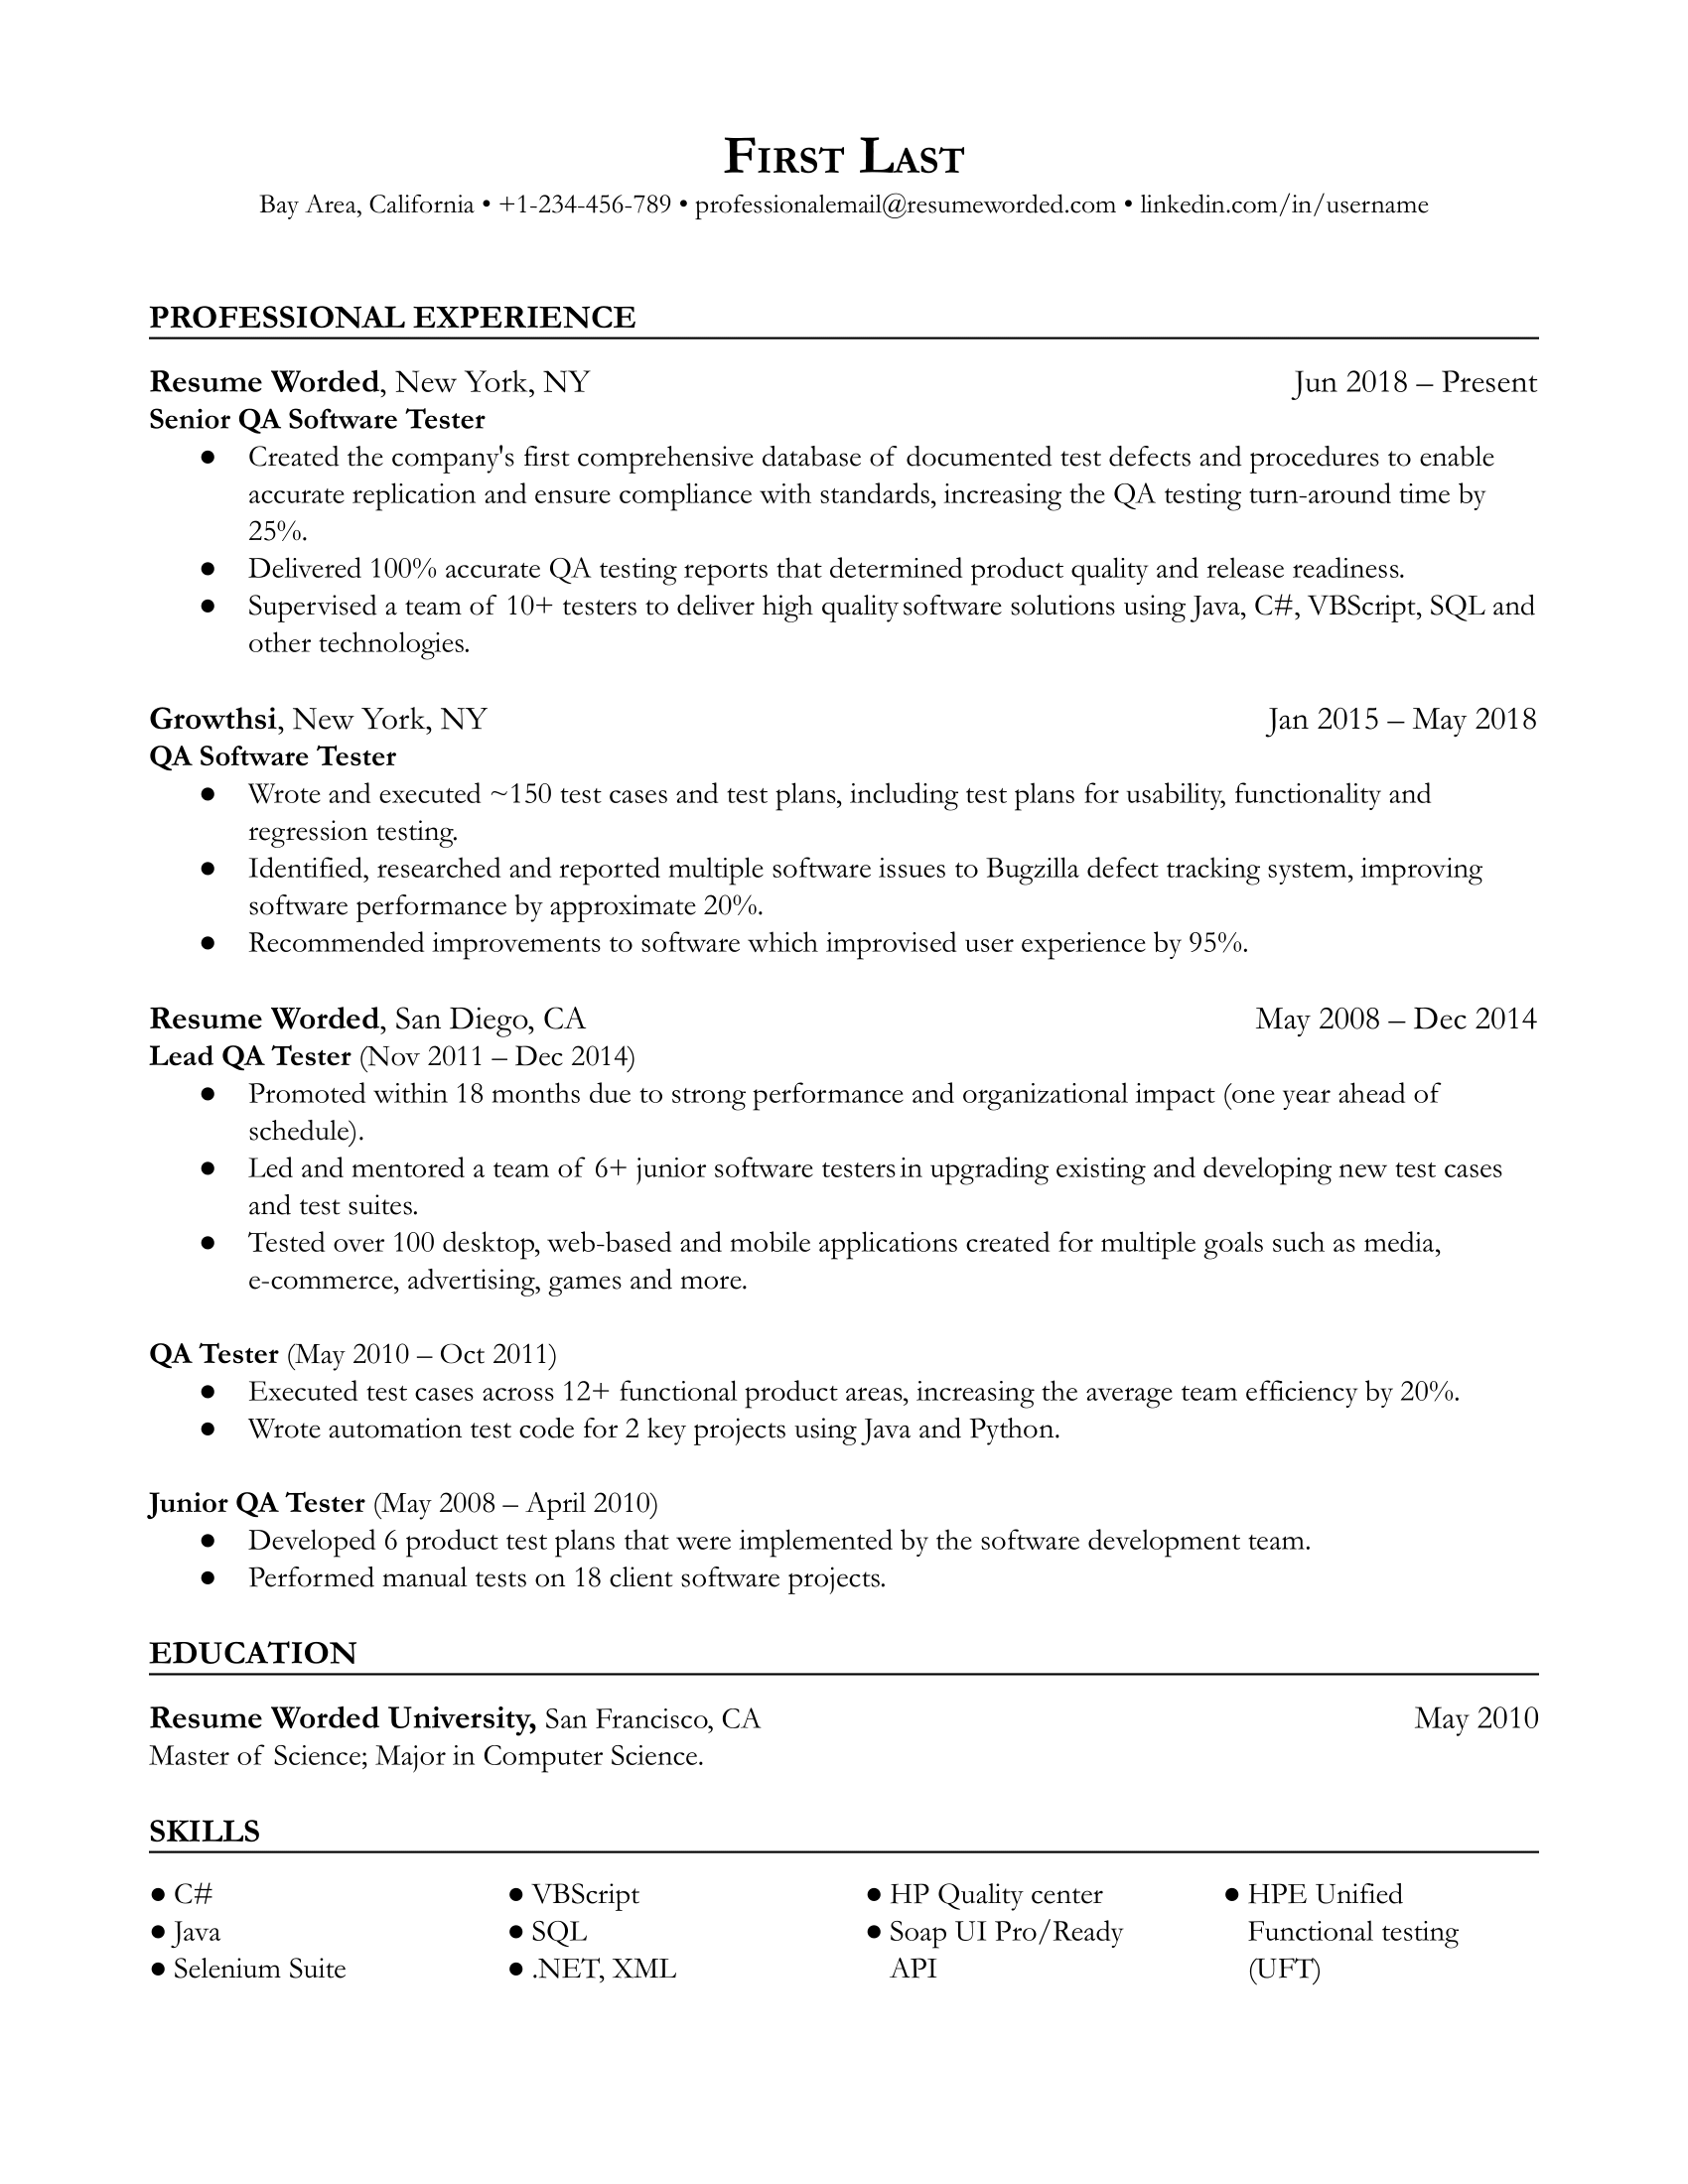 QA (Quality Assurance) Software Tester Resume Template + Example